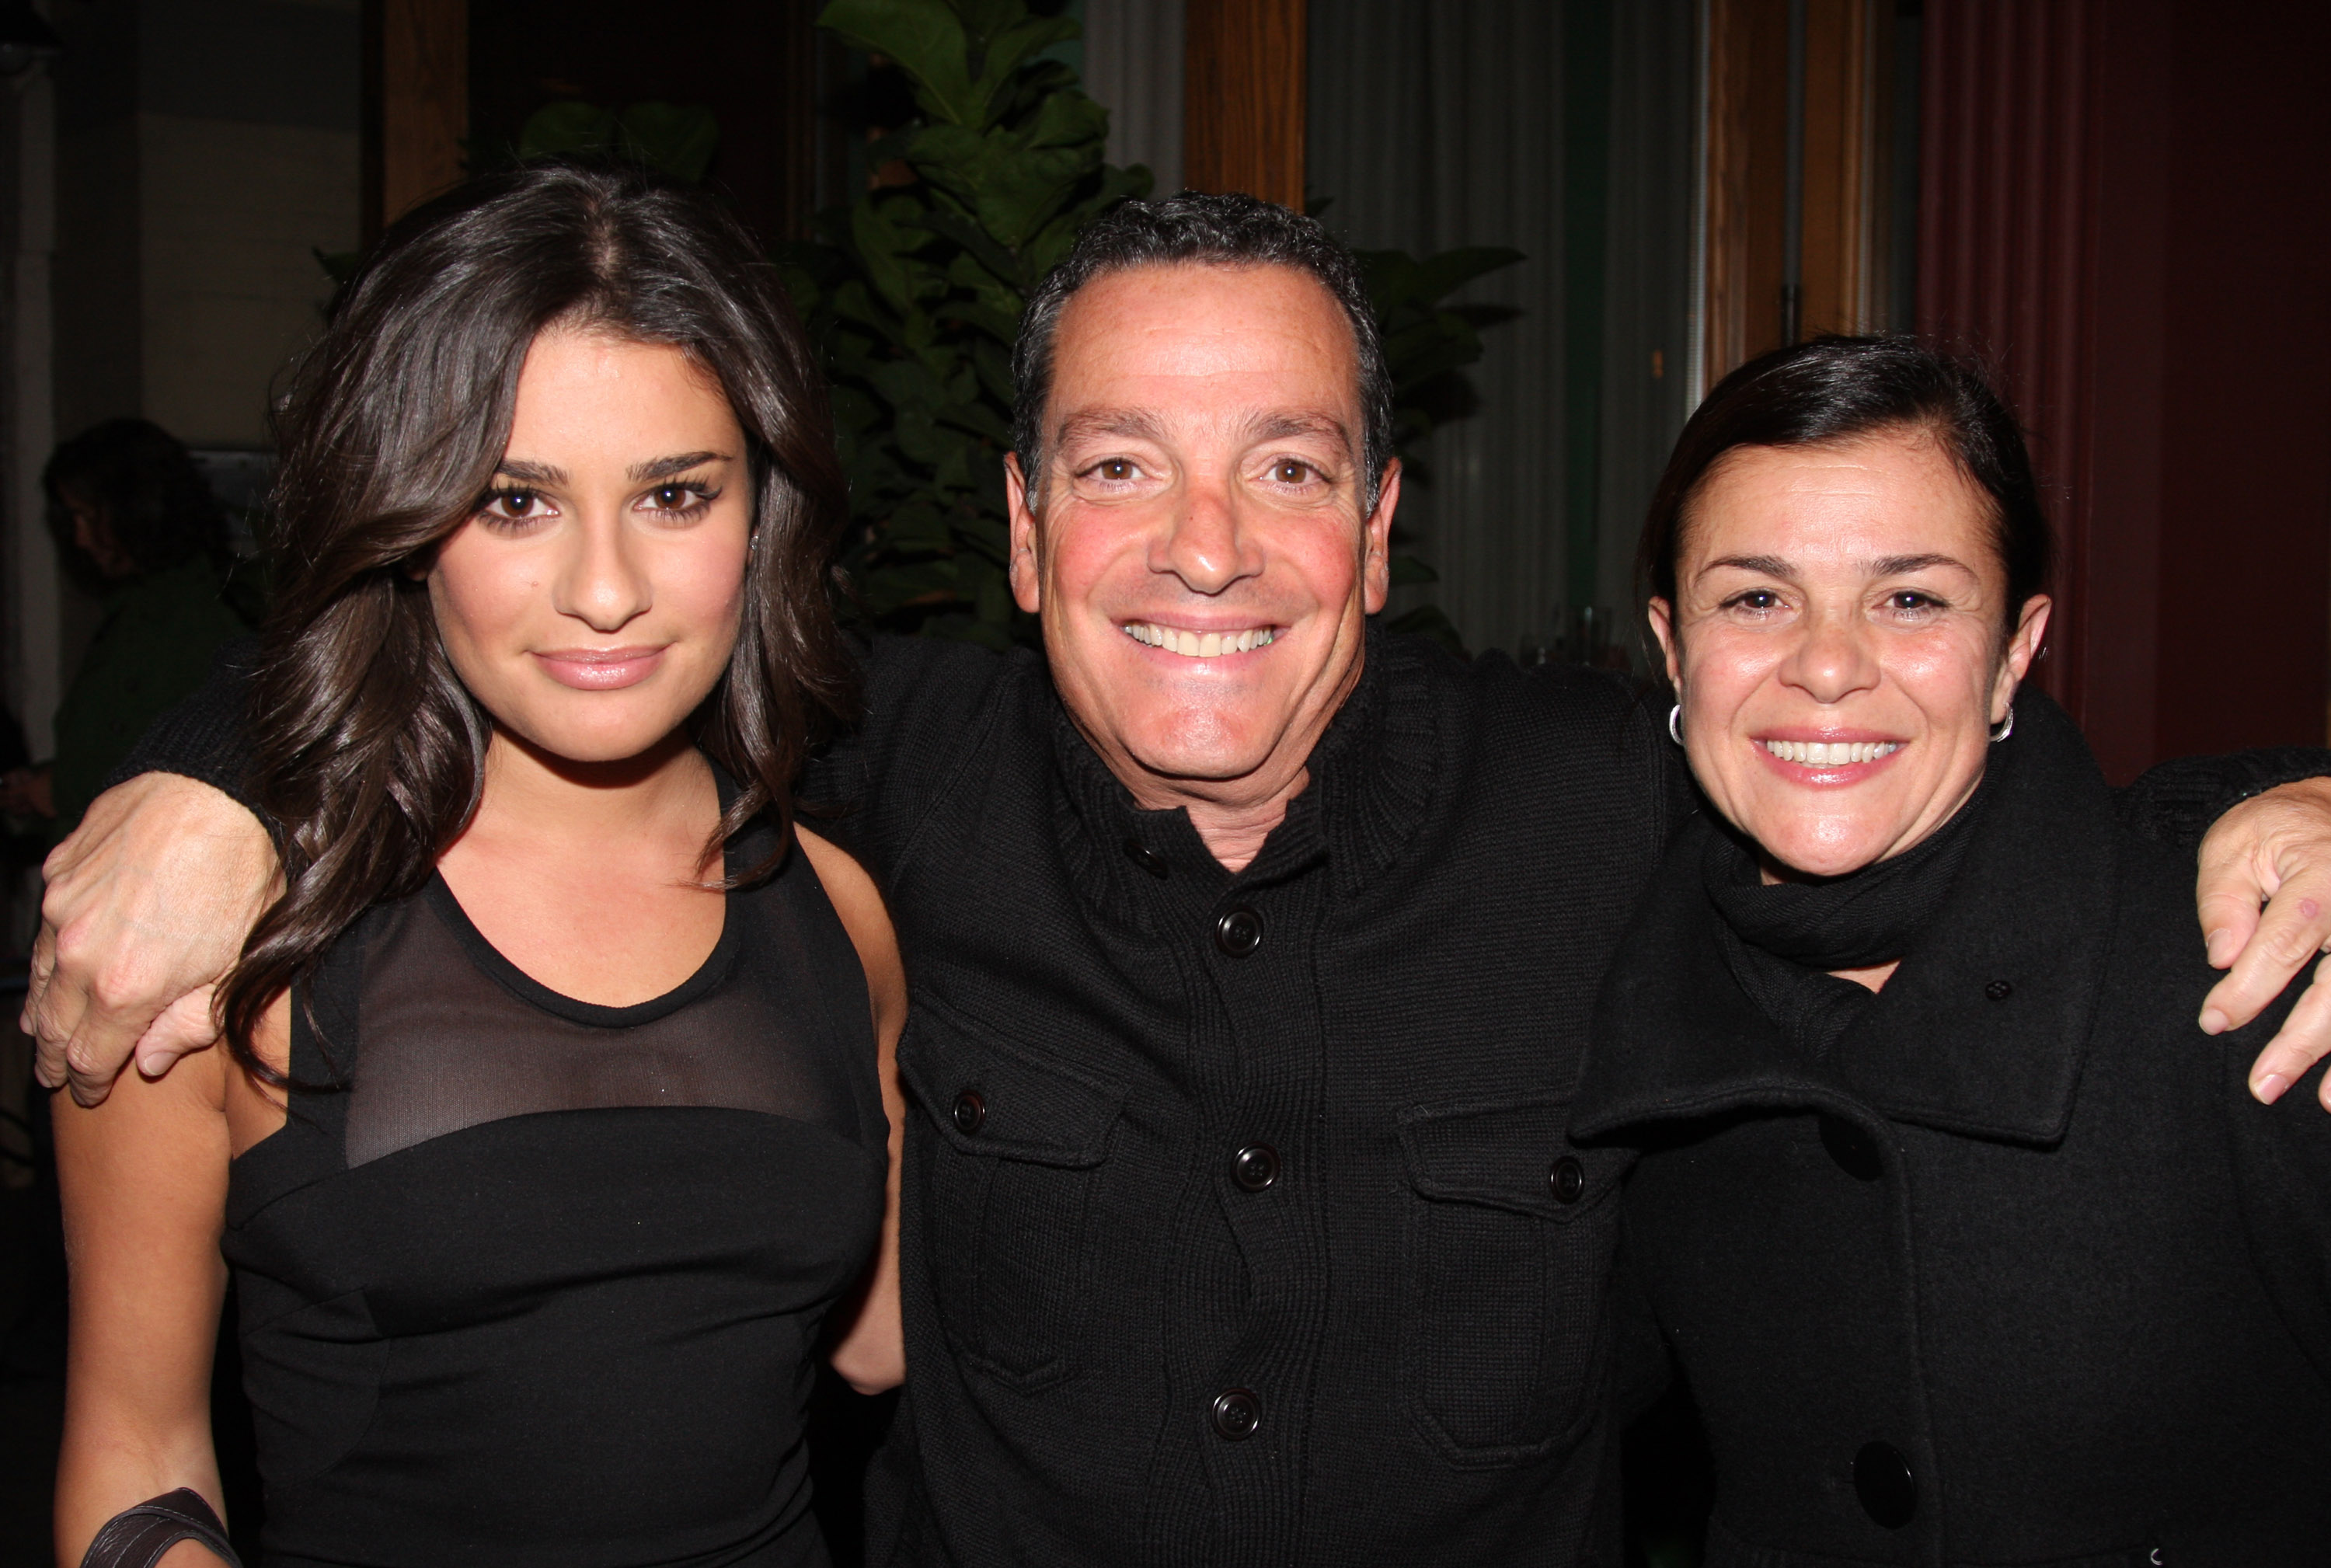 Lea Michele, her father Marc Sarfati, and mother Edith Sarfati attend the hit rock musical "Rock of Ages" on Broadway at The Brooks Atkinson Theater on October 6, 2009, in New York, New York. | Source: Getty Images